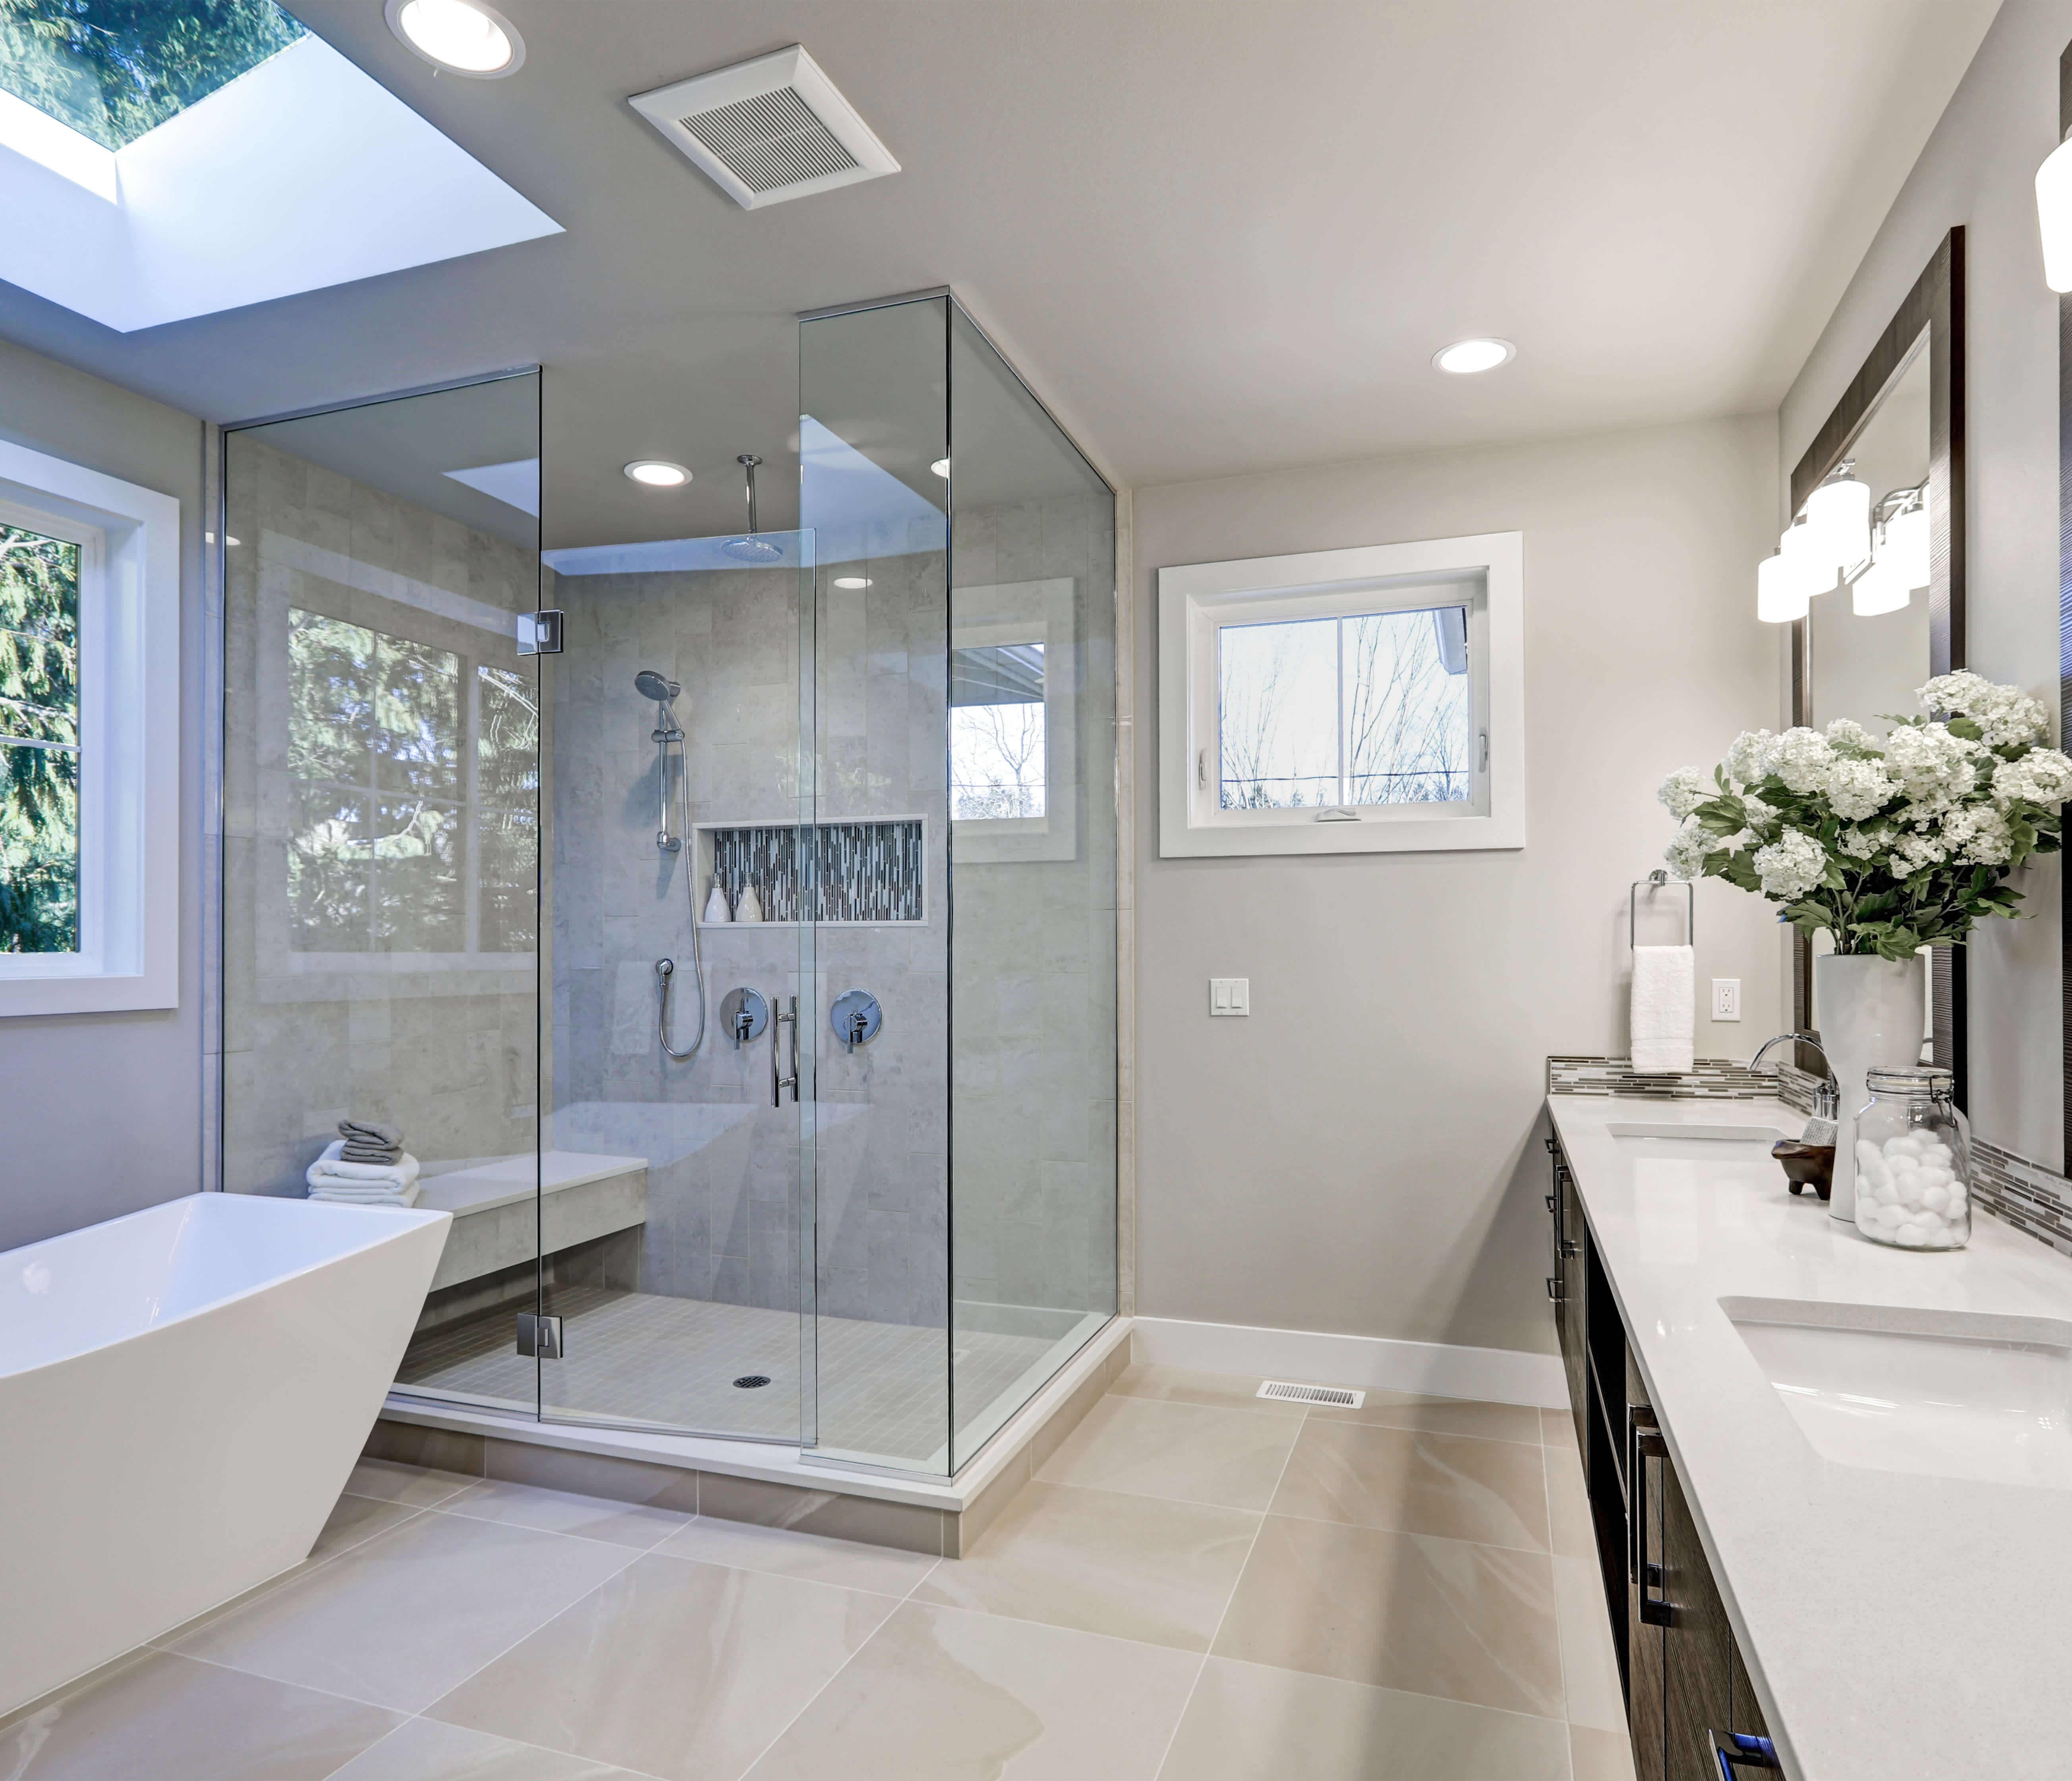 Bathroom Remodeling Considerations | Promodeling Inc.